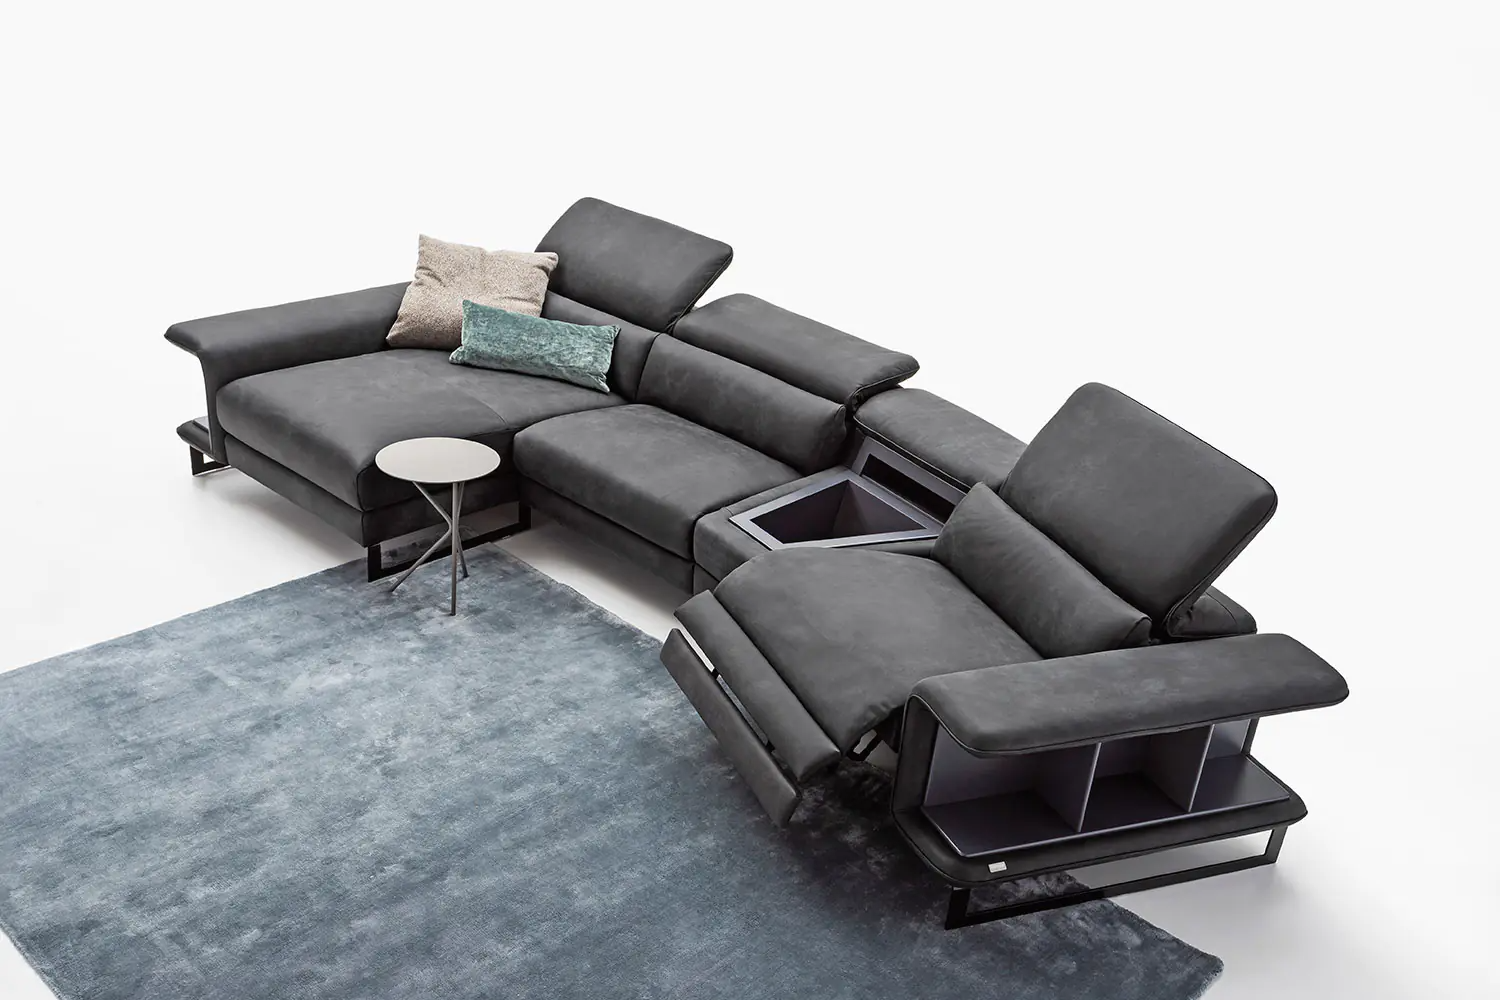 Ultimate Comfort and Style: Curved Sectional Sofa with Recliner for Your Living Room